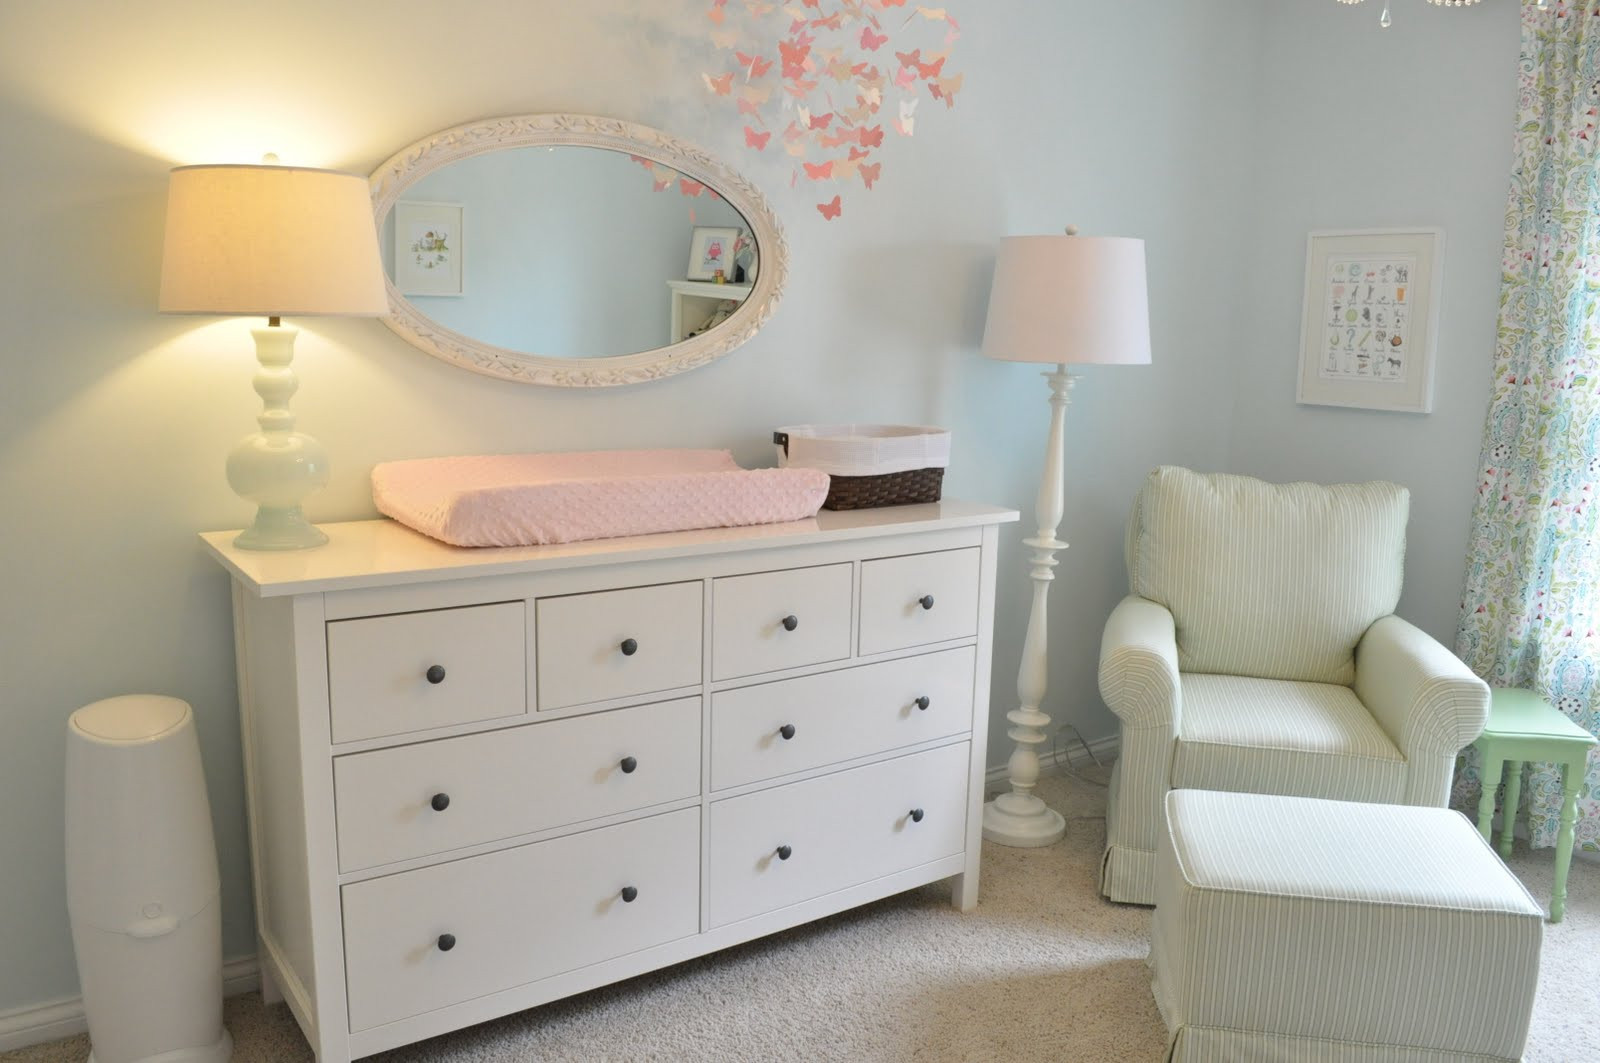 White Dressers For Baby Room
 Anyone have pics of Ikea Hemnes dresser in nursery — The Bump